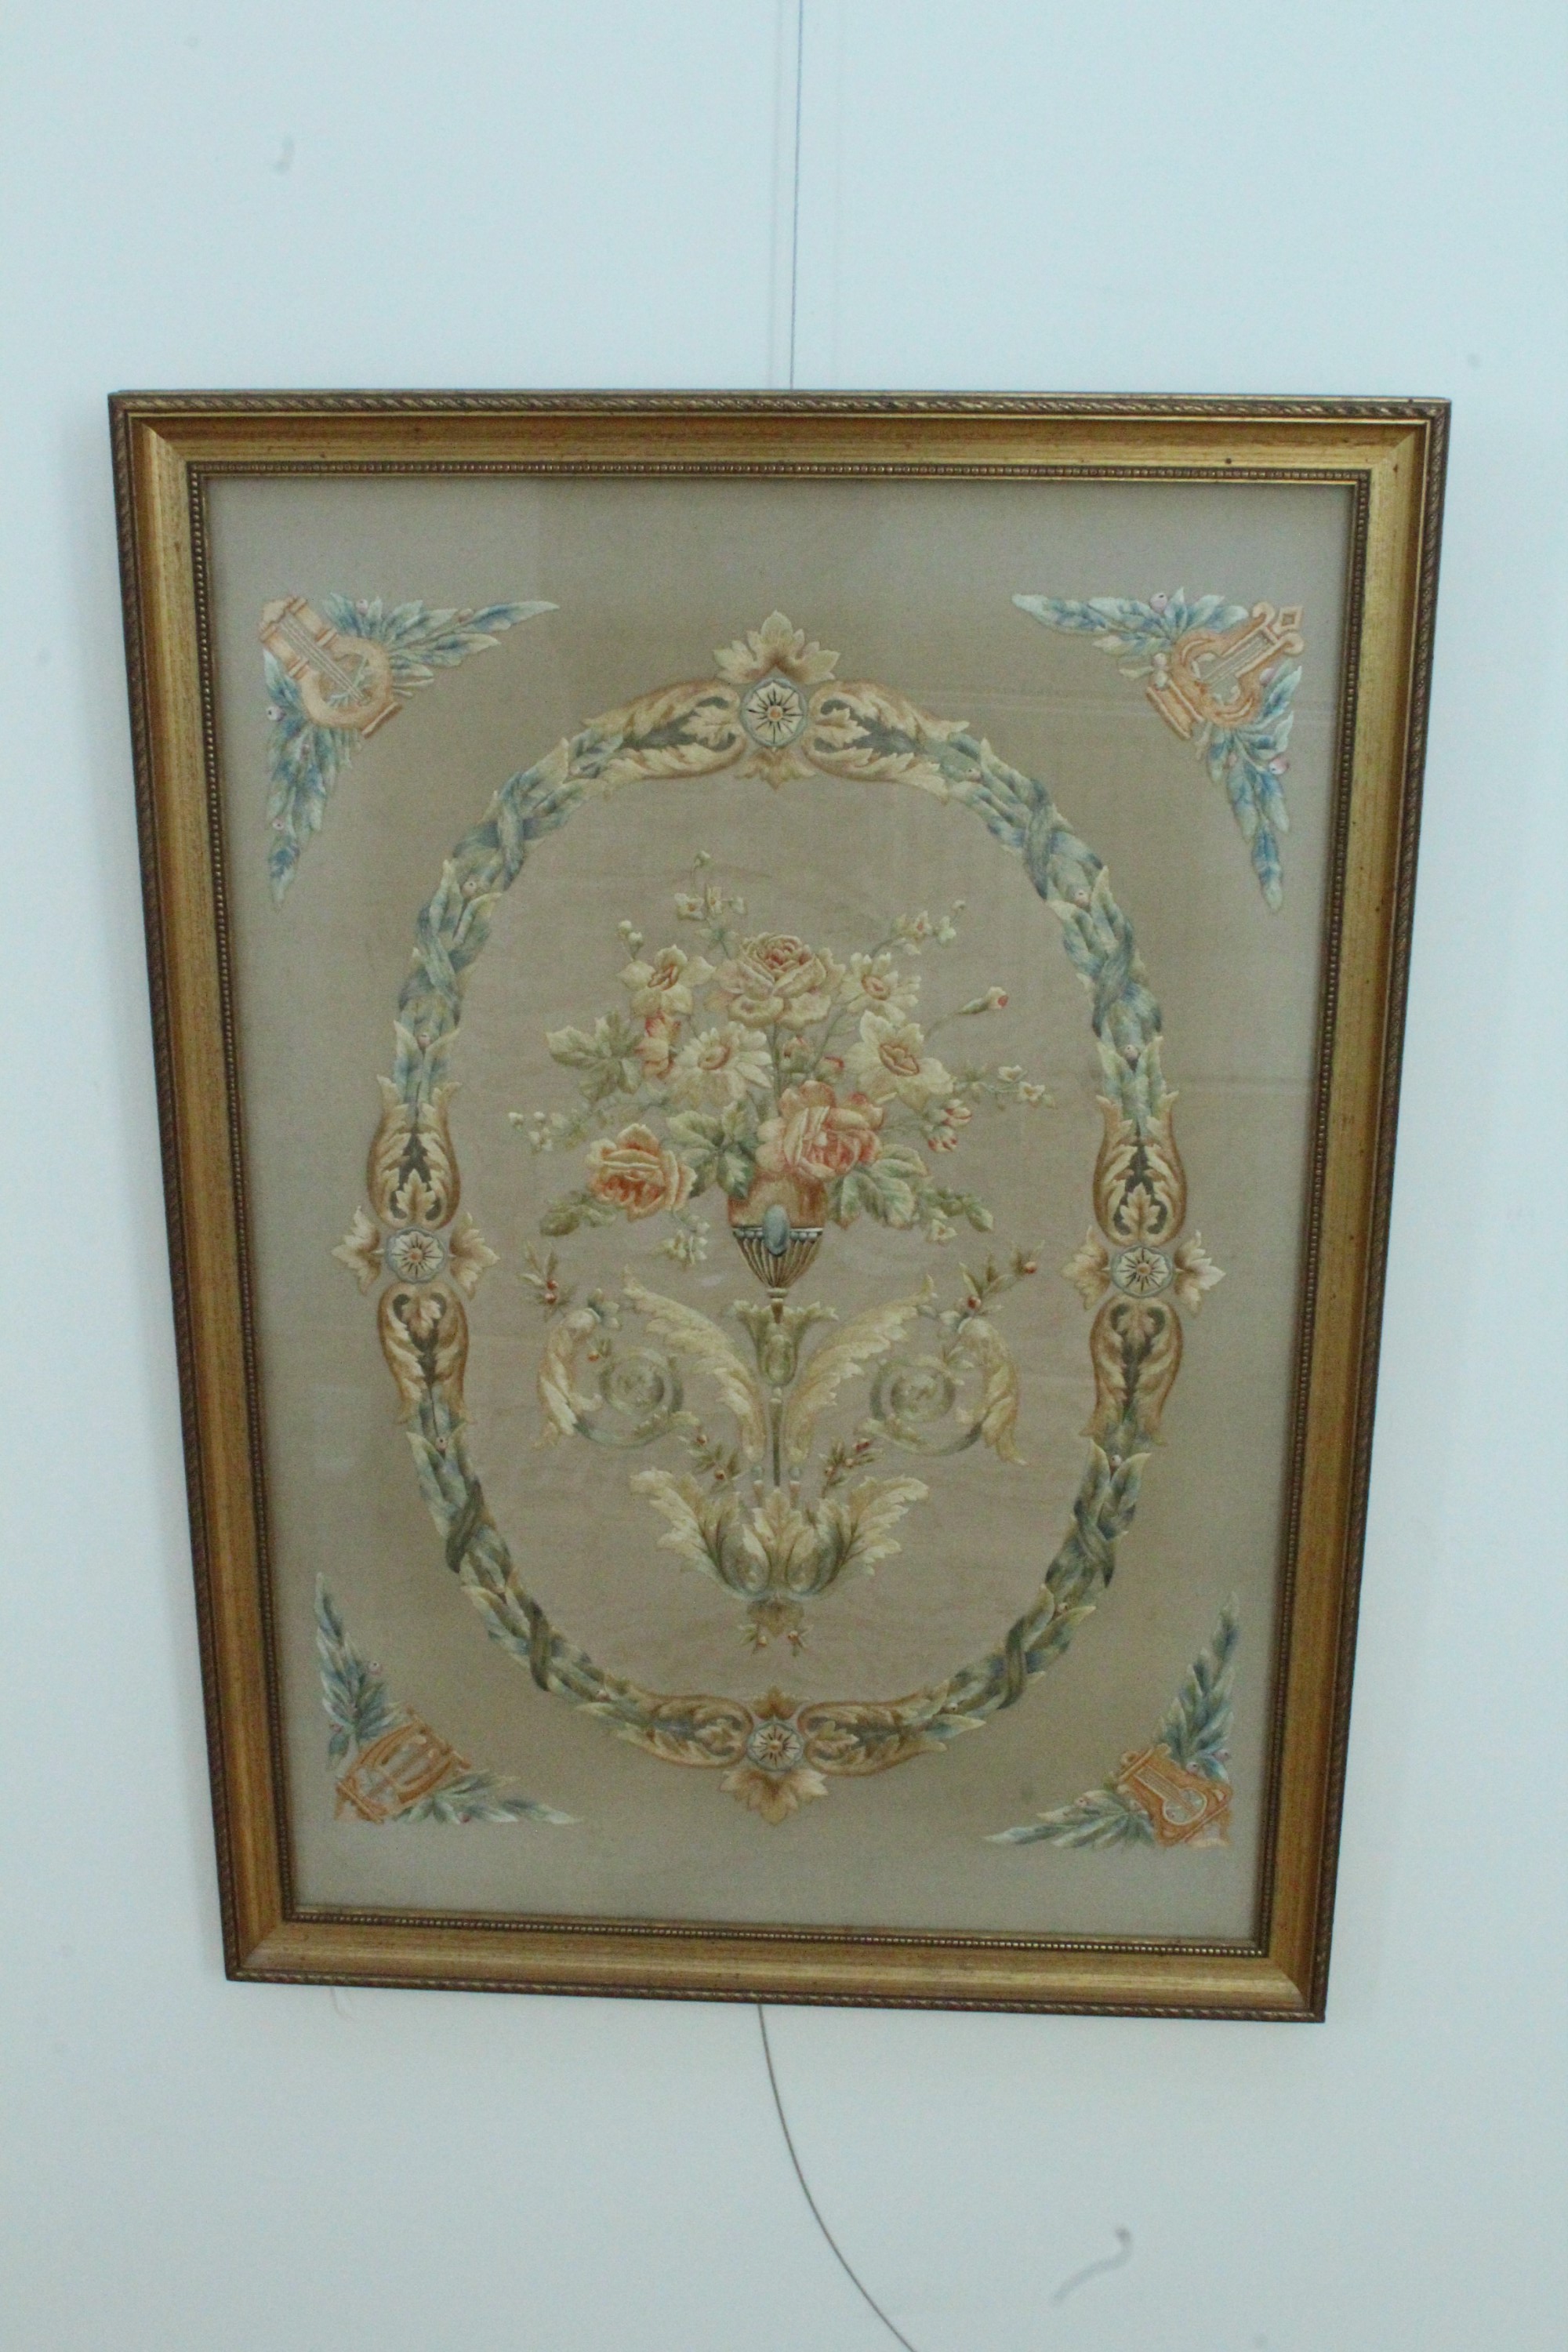 An early 20th Century embroidered silk panel, depicting a stylized urn with flowers, above